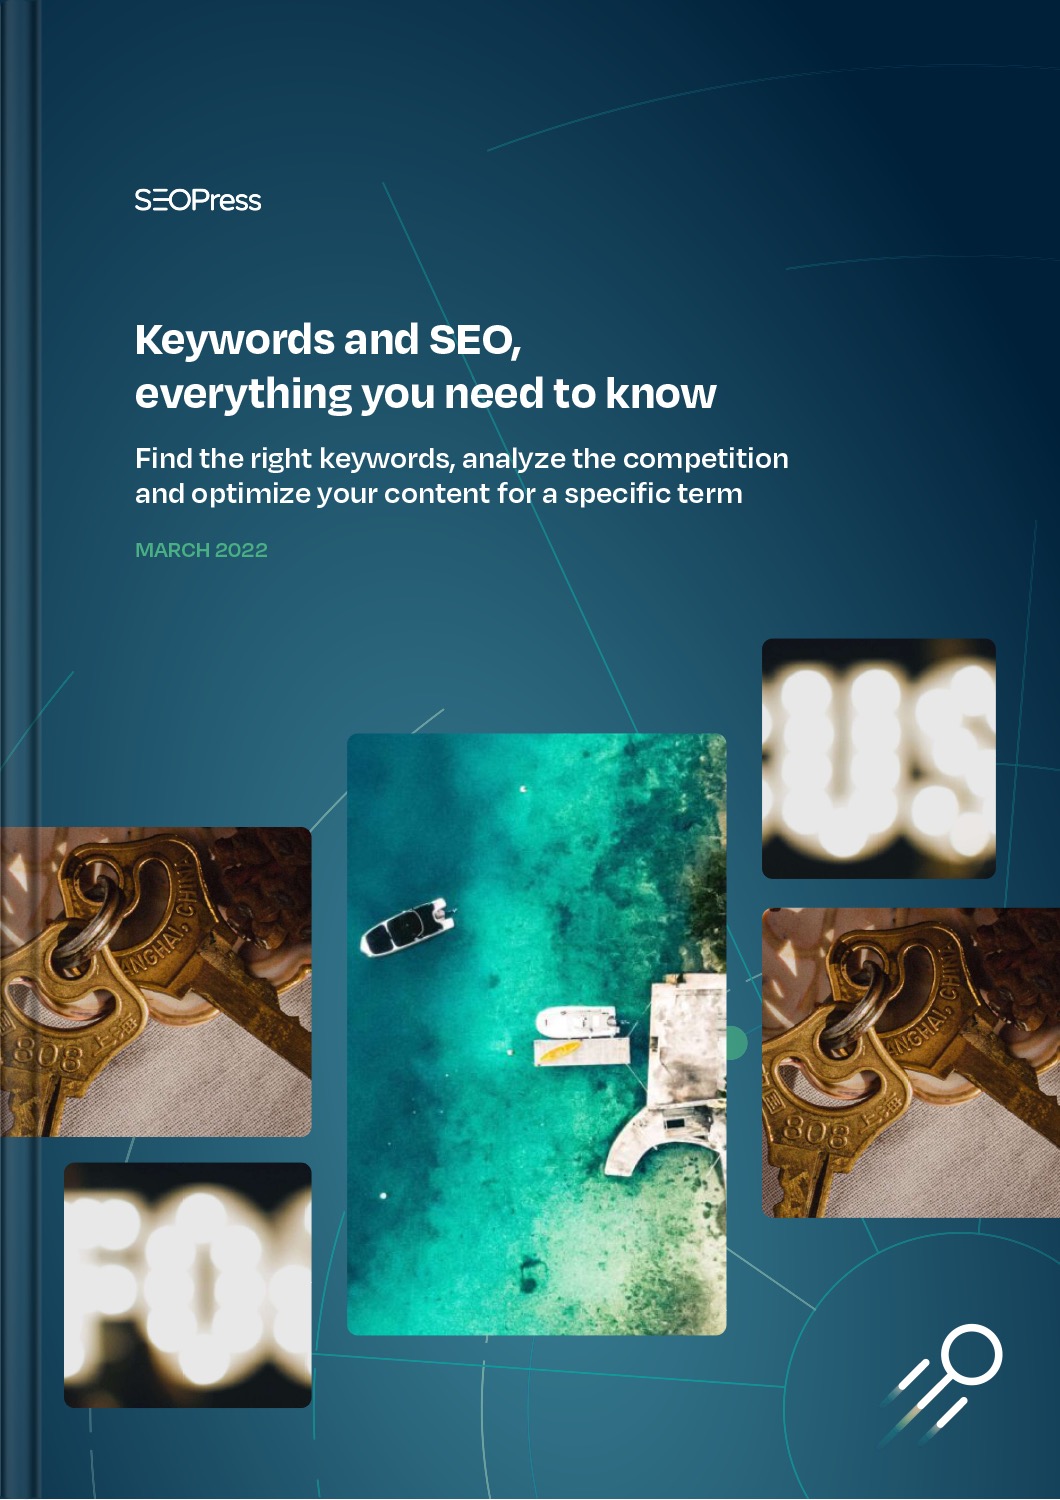 Keywords and SEO, everything you need to know